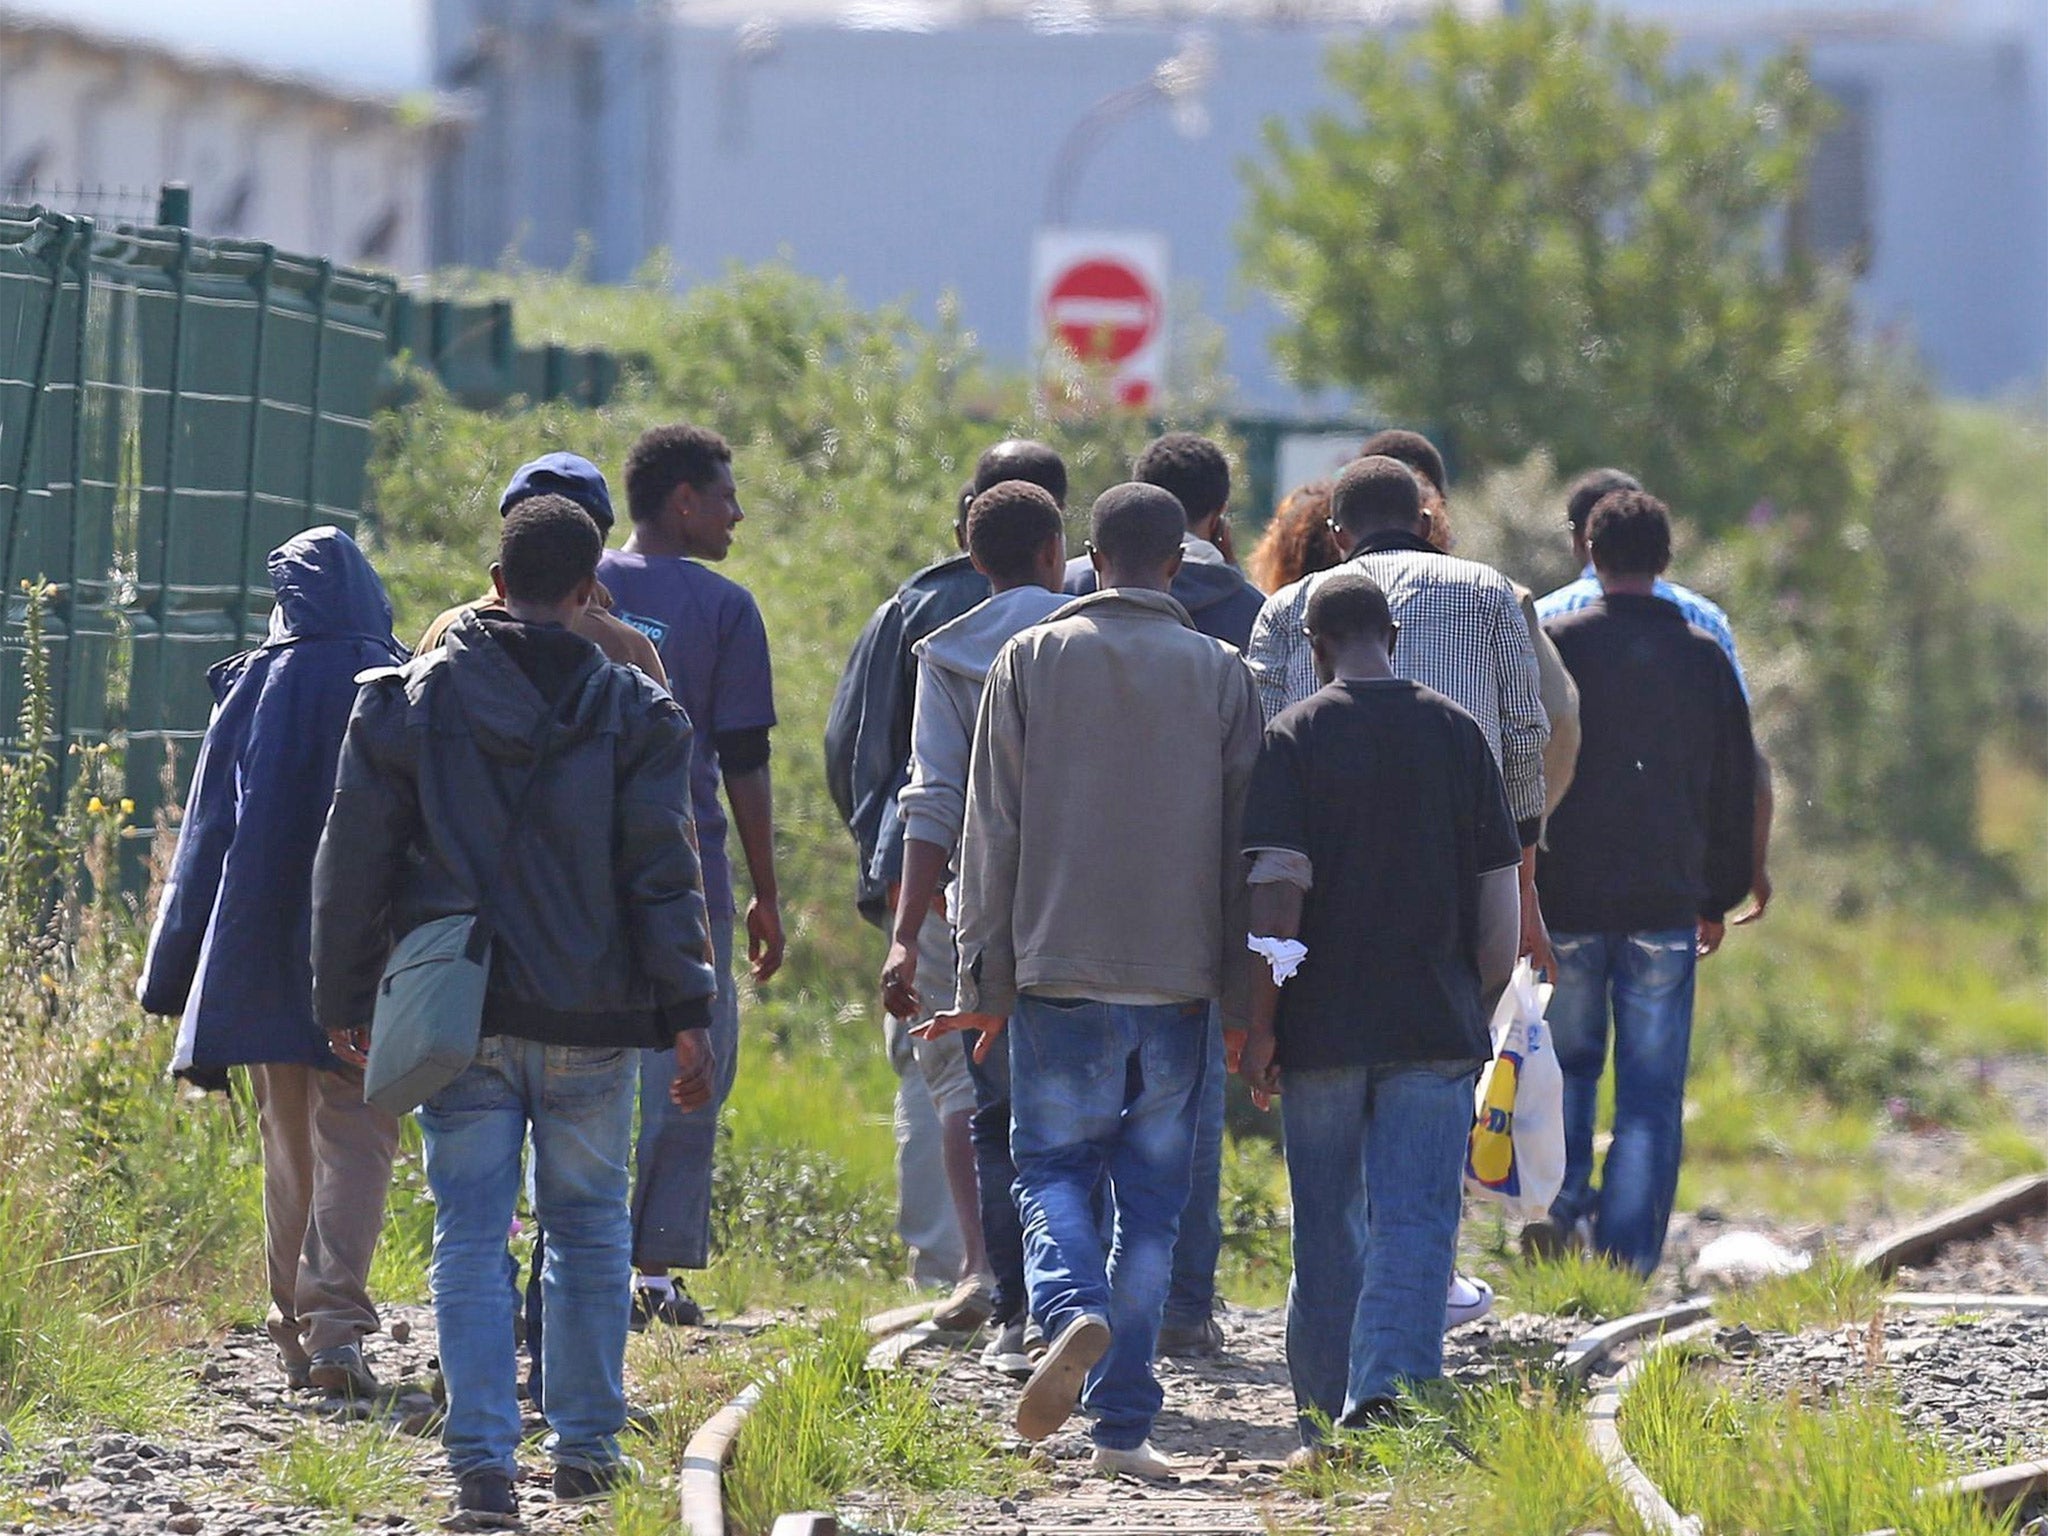 A group of migrants make their way through Calais, heading for Britain.